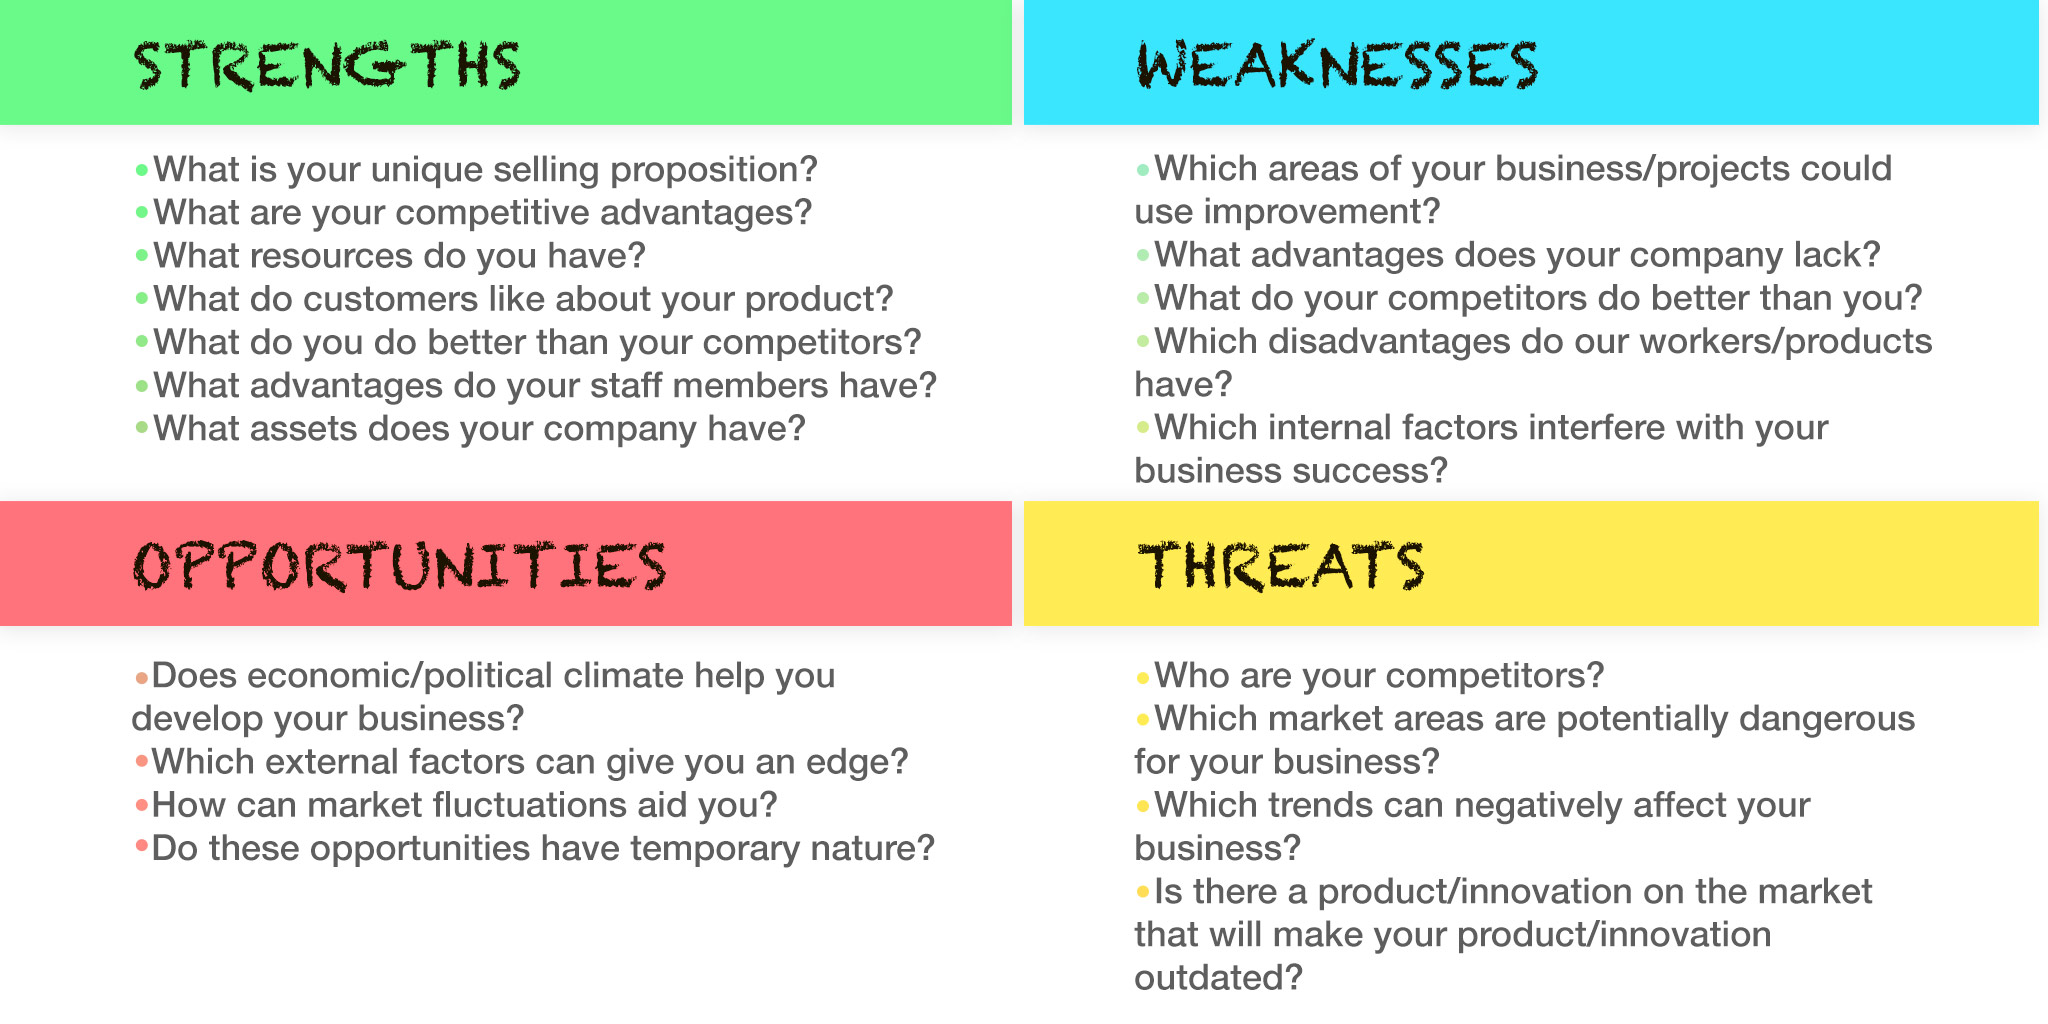 swot analysis examples definition threats questions table opportunities example strengths weaknesses benefits law strategy keepsolid advantages exploiting develop helps